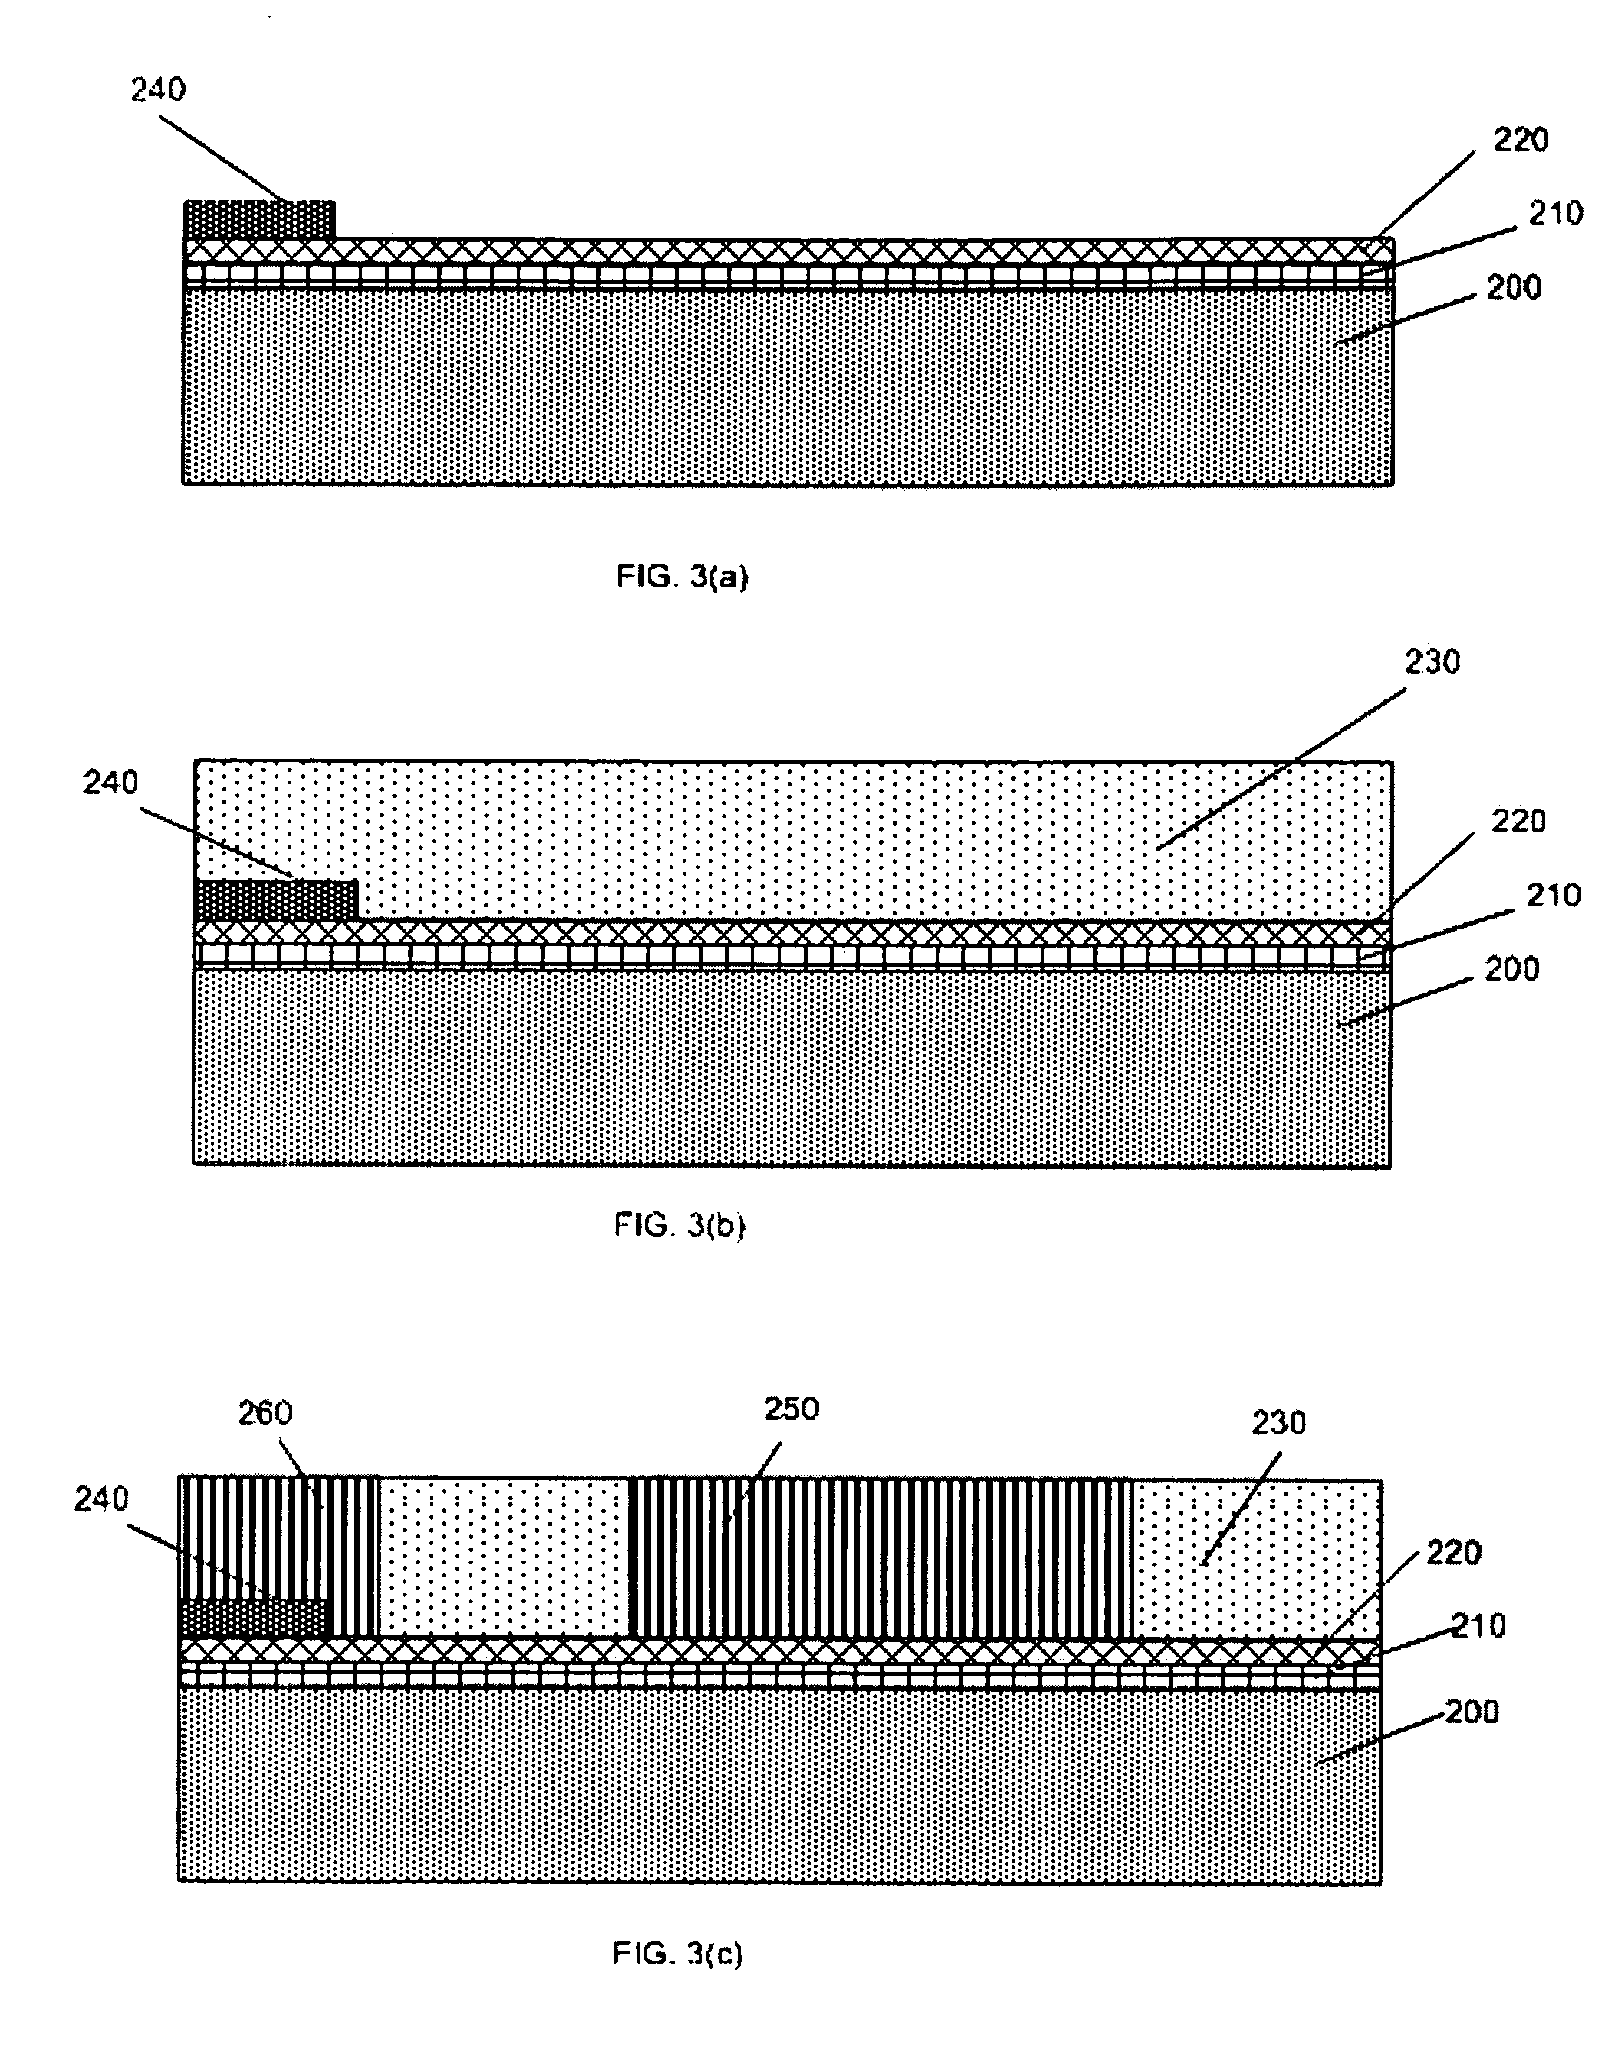 Micromachined Thermal Mass Flow Sensor With Self-Cleaning Capability And Methods Of Making the Same